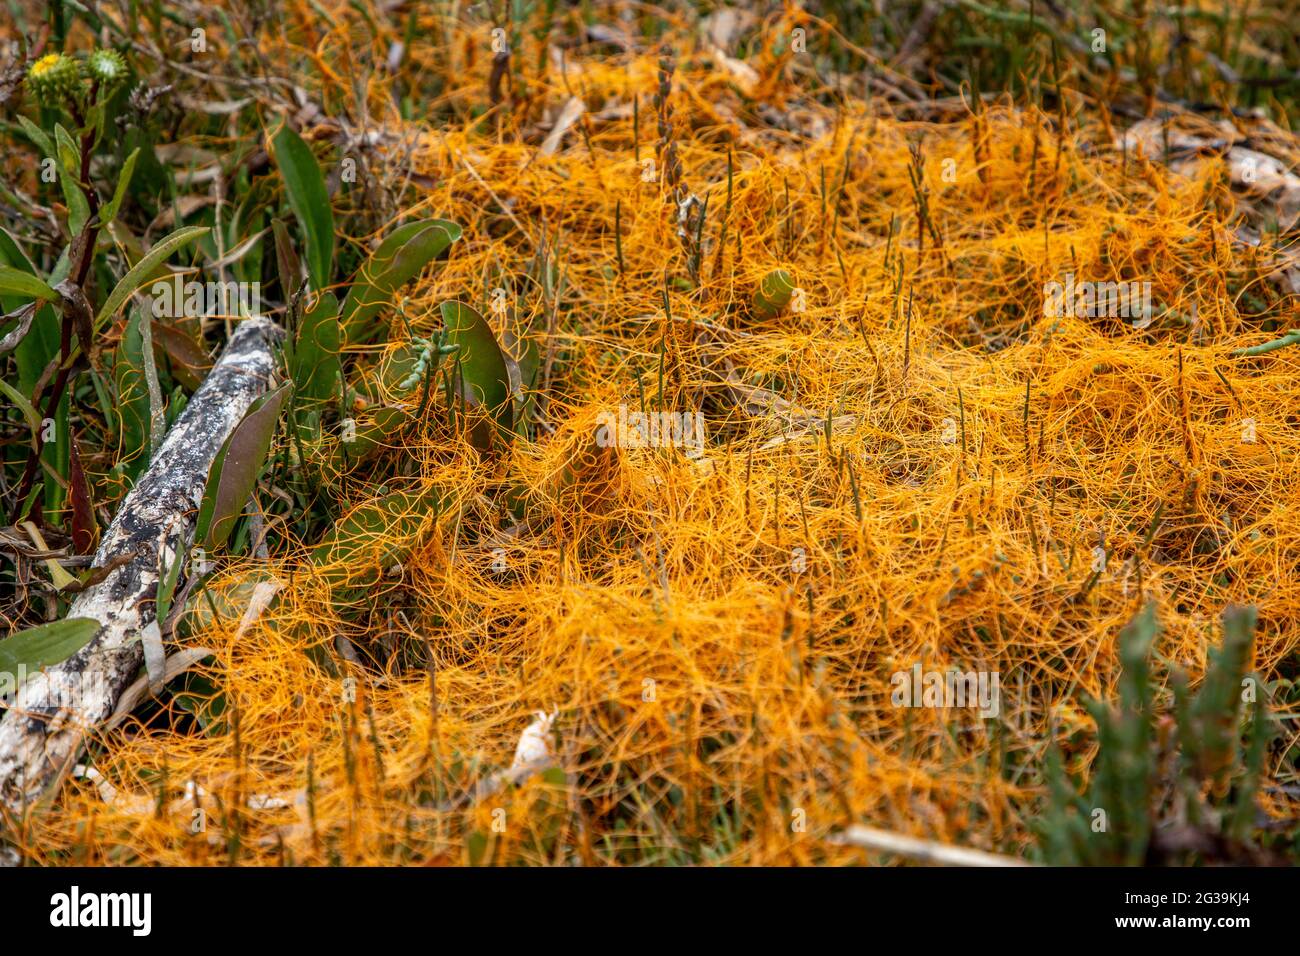 Dodder plant found around Tomales Bay. The Bay is a long narrow inlet of the Pacific Ocean in Marin County, California. Much of the surrounding area i Stock Photo